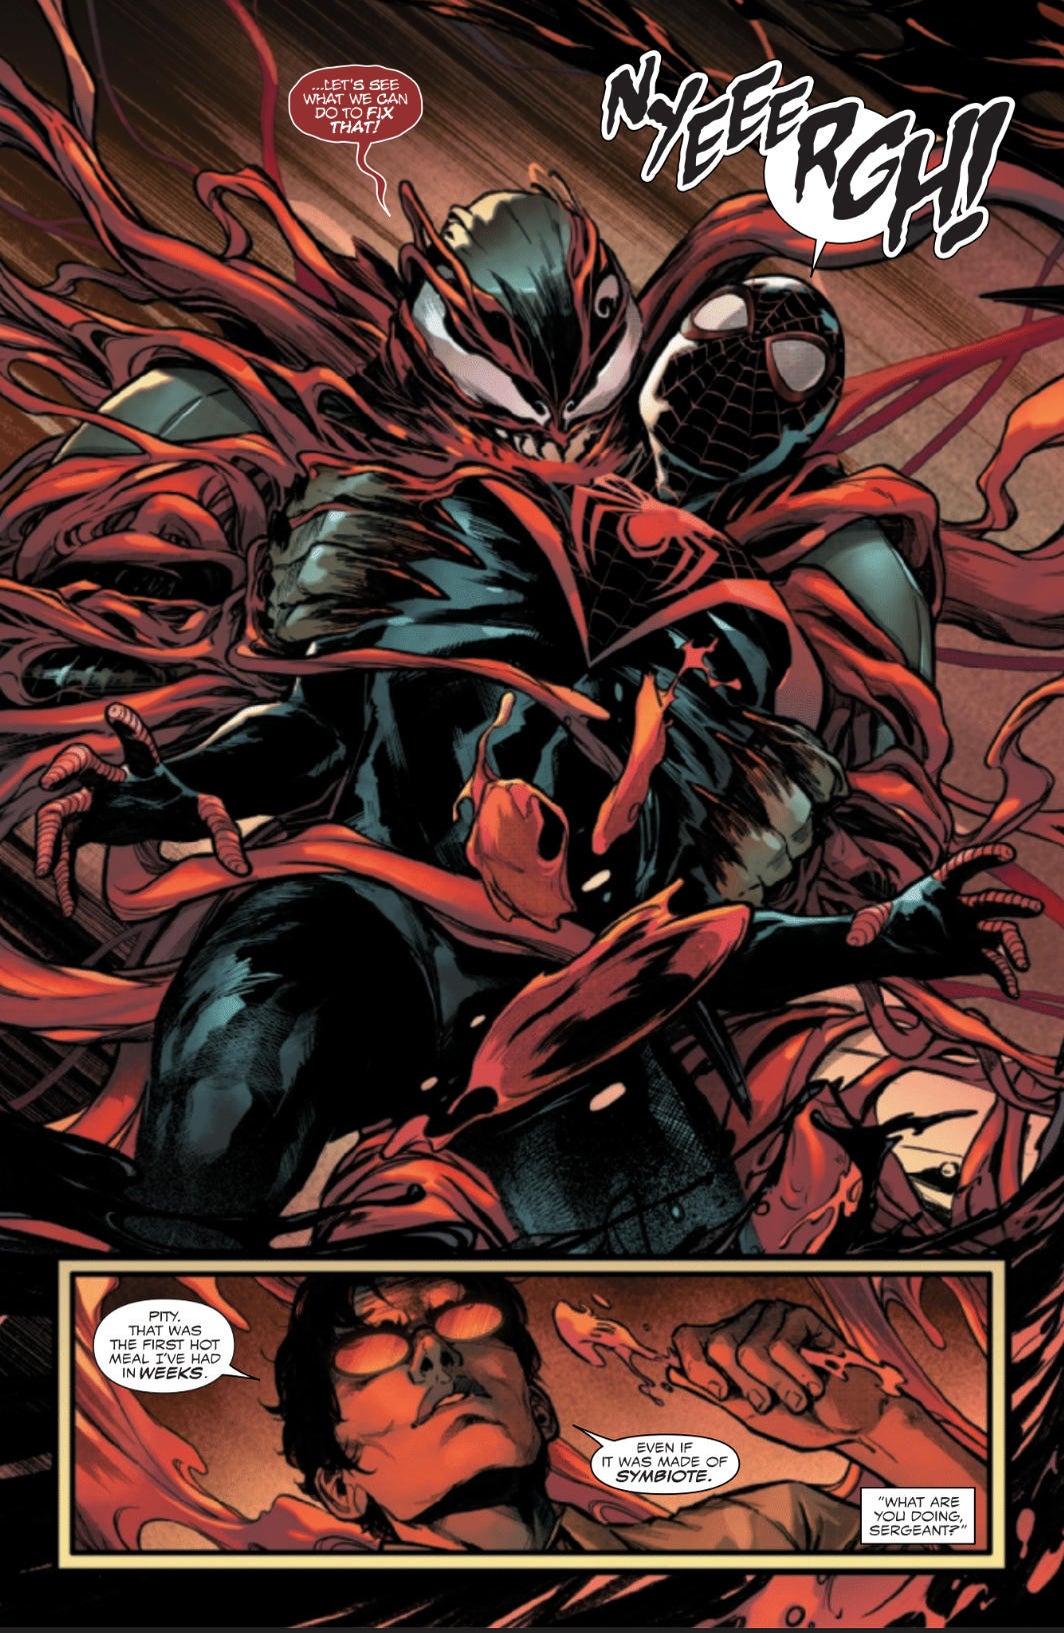 Marvels Former Carnage Host Cletus Kasady Reveals A Terrifying New Power